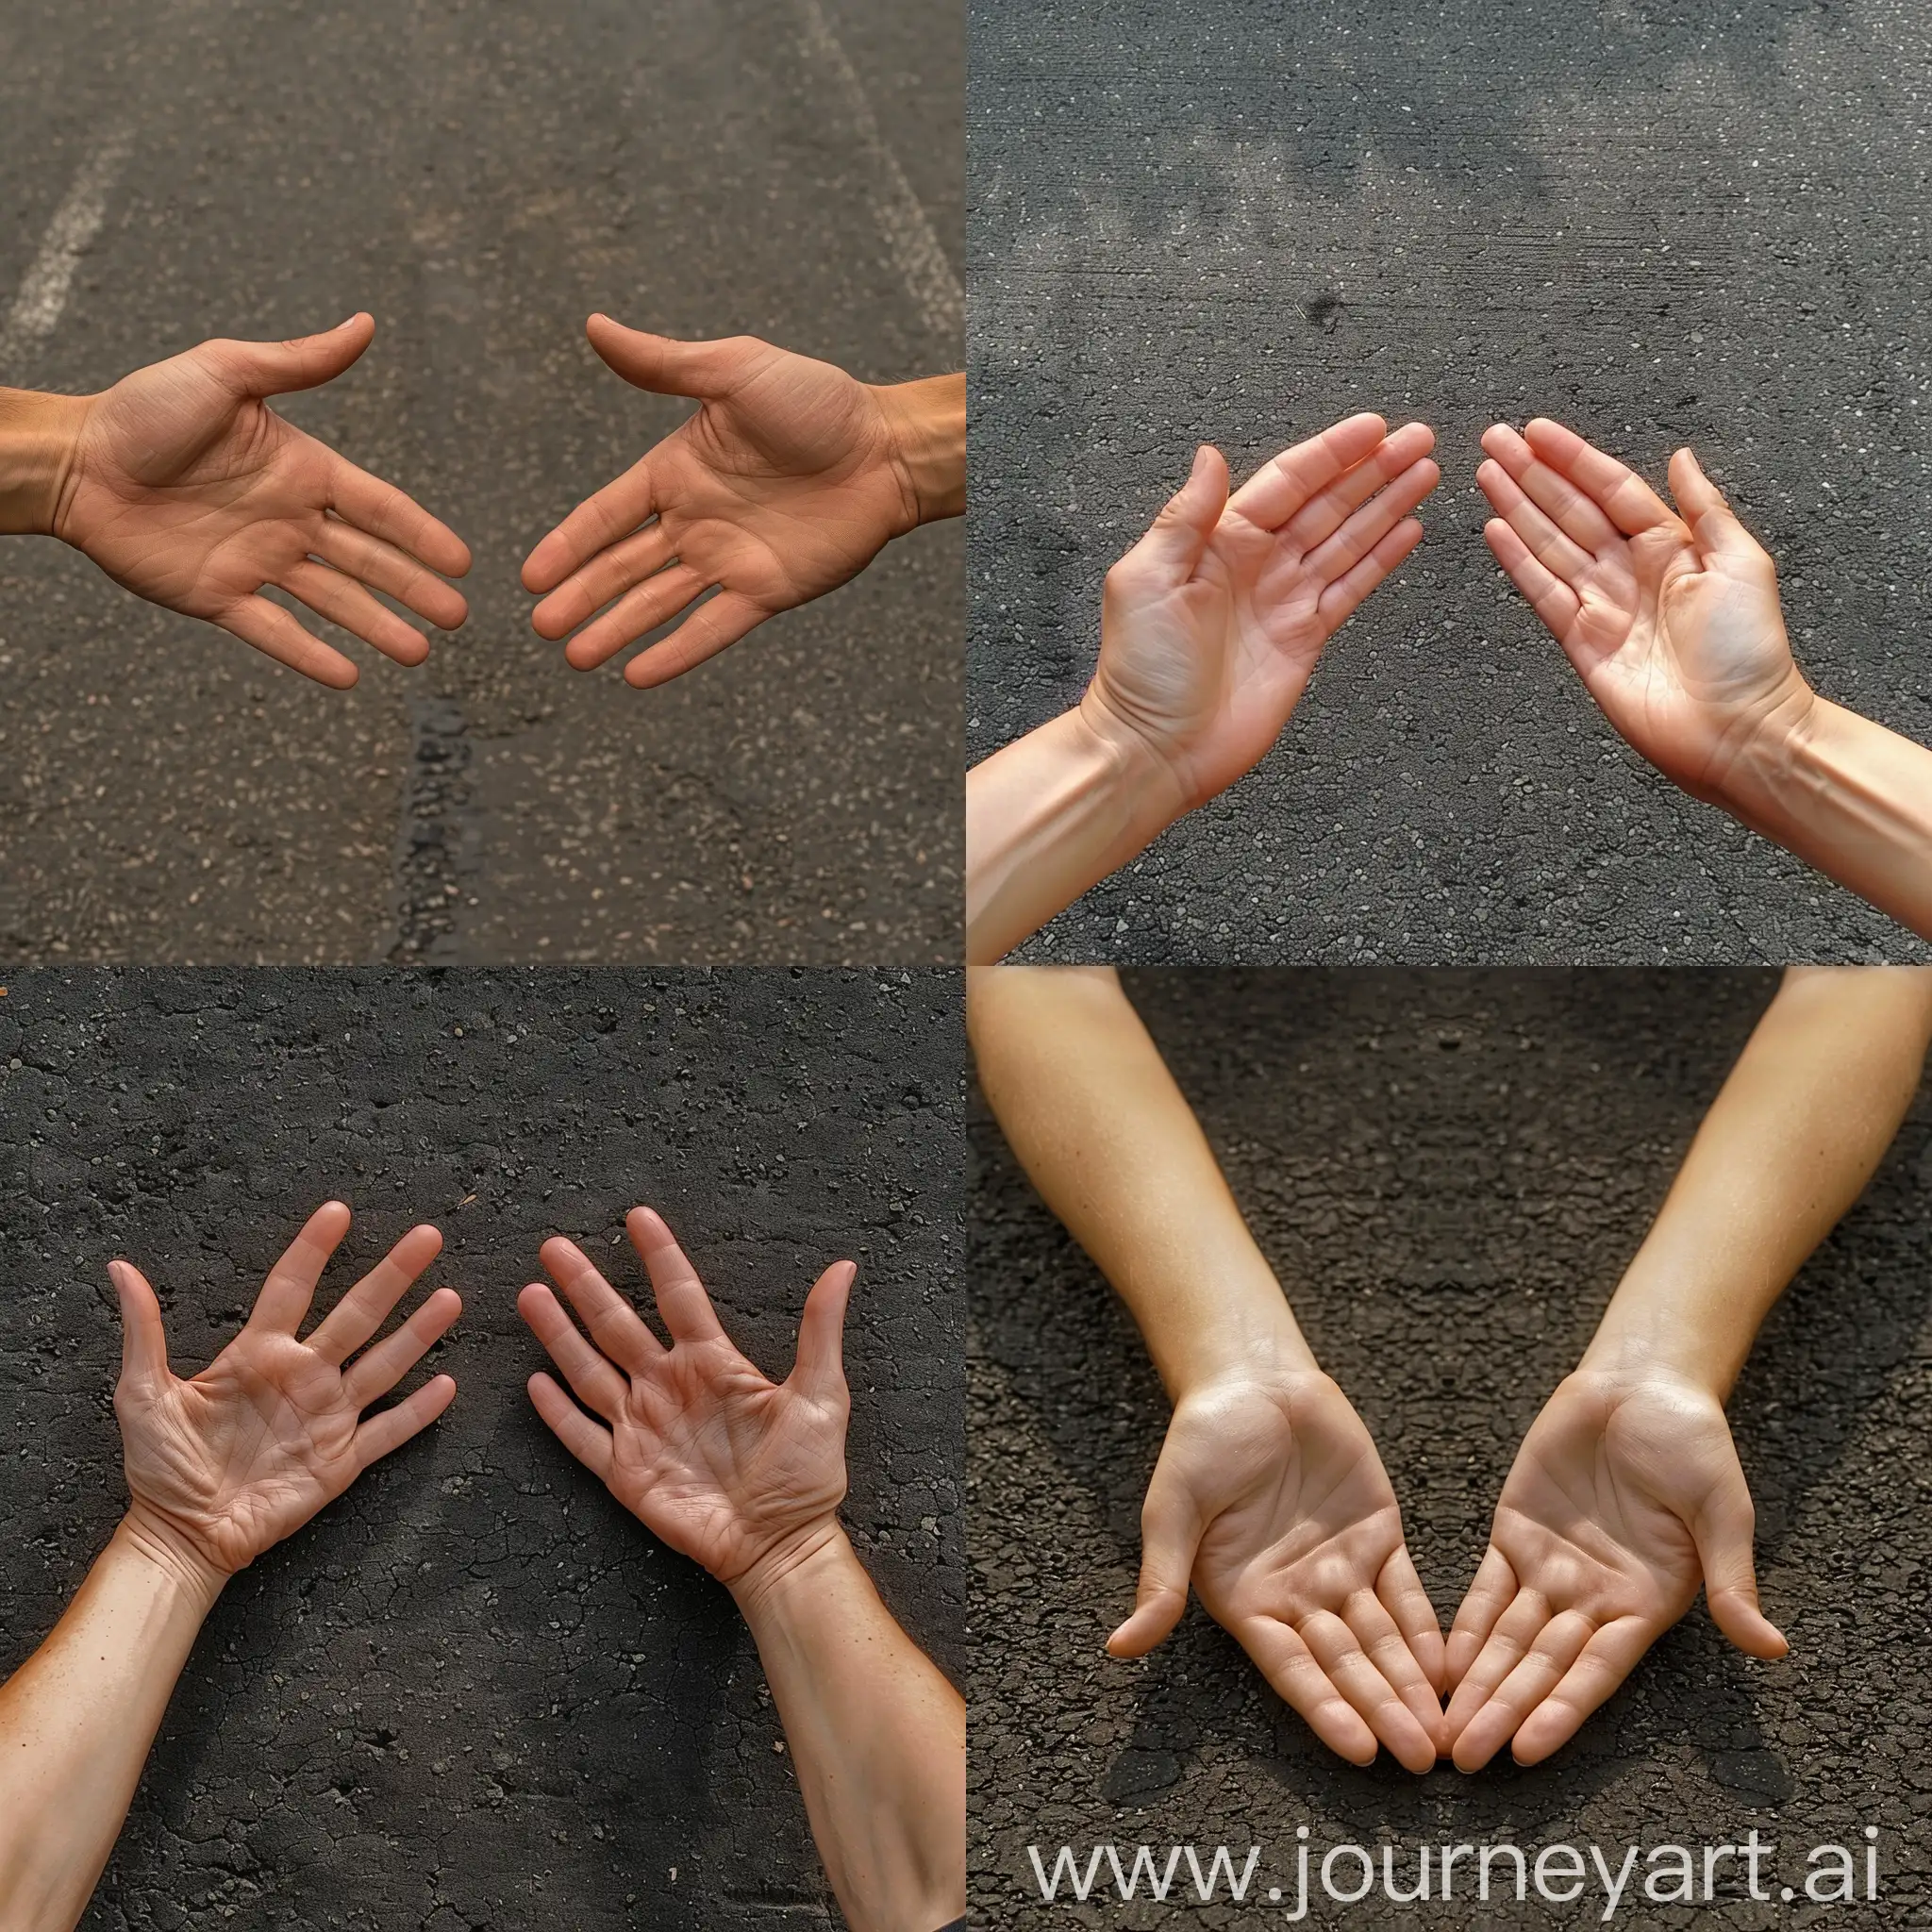 On asphalt ground, there are two hands facing each other.